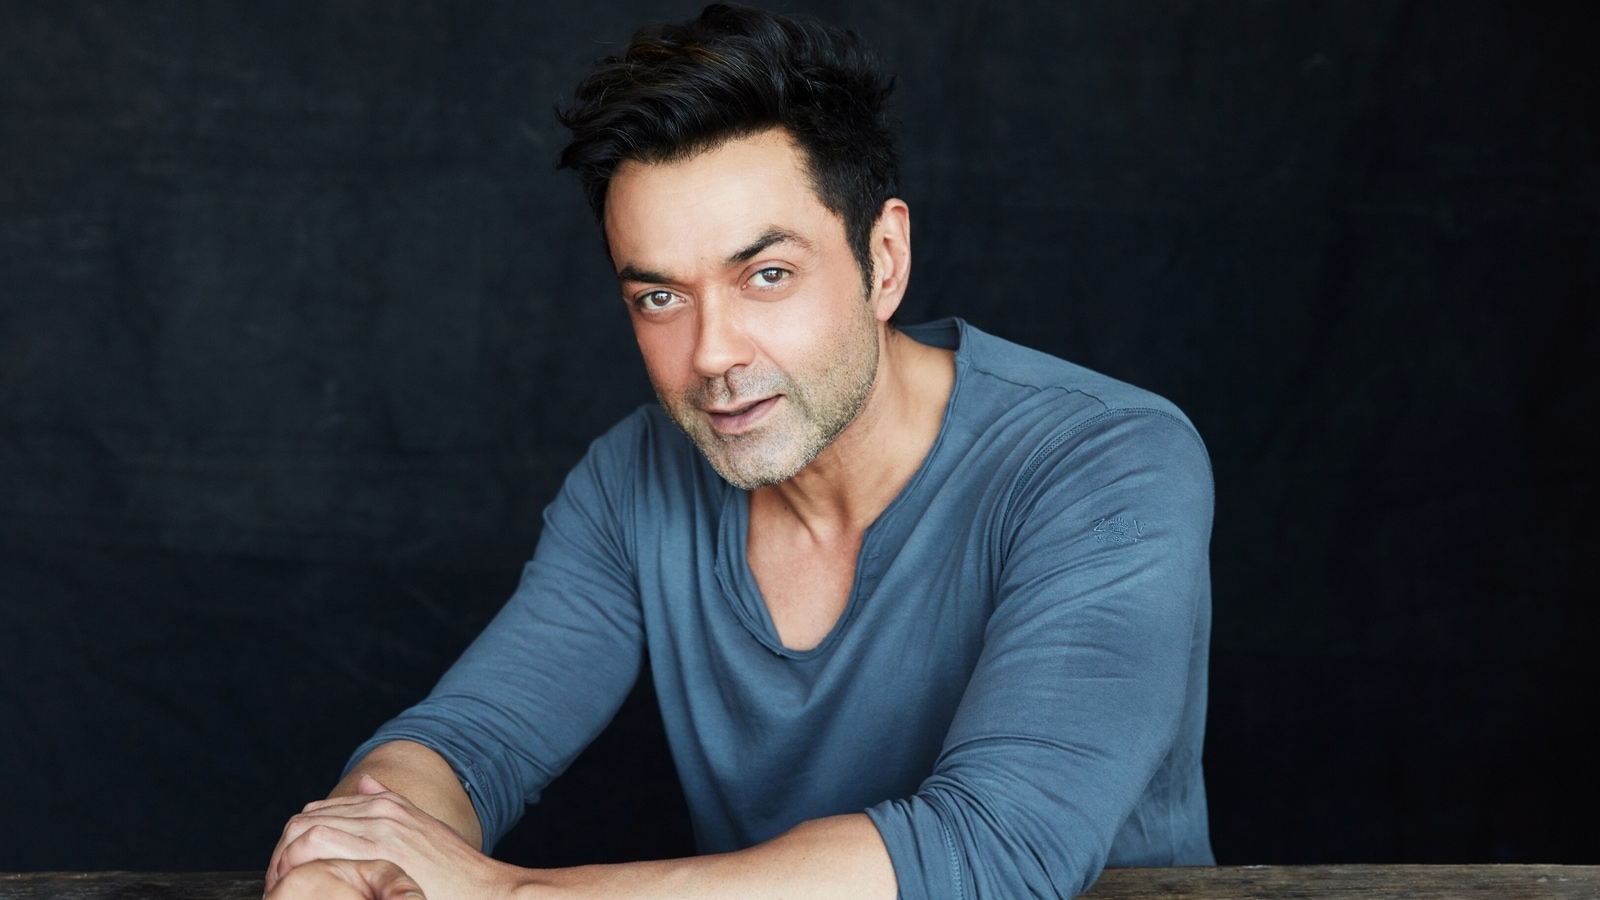 Bobby Deol calls allegations of unprofessionalism ‘unfair fabrications’, says ‘charges were hurled at me without basis’